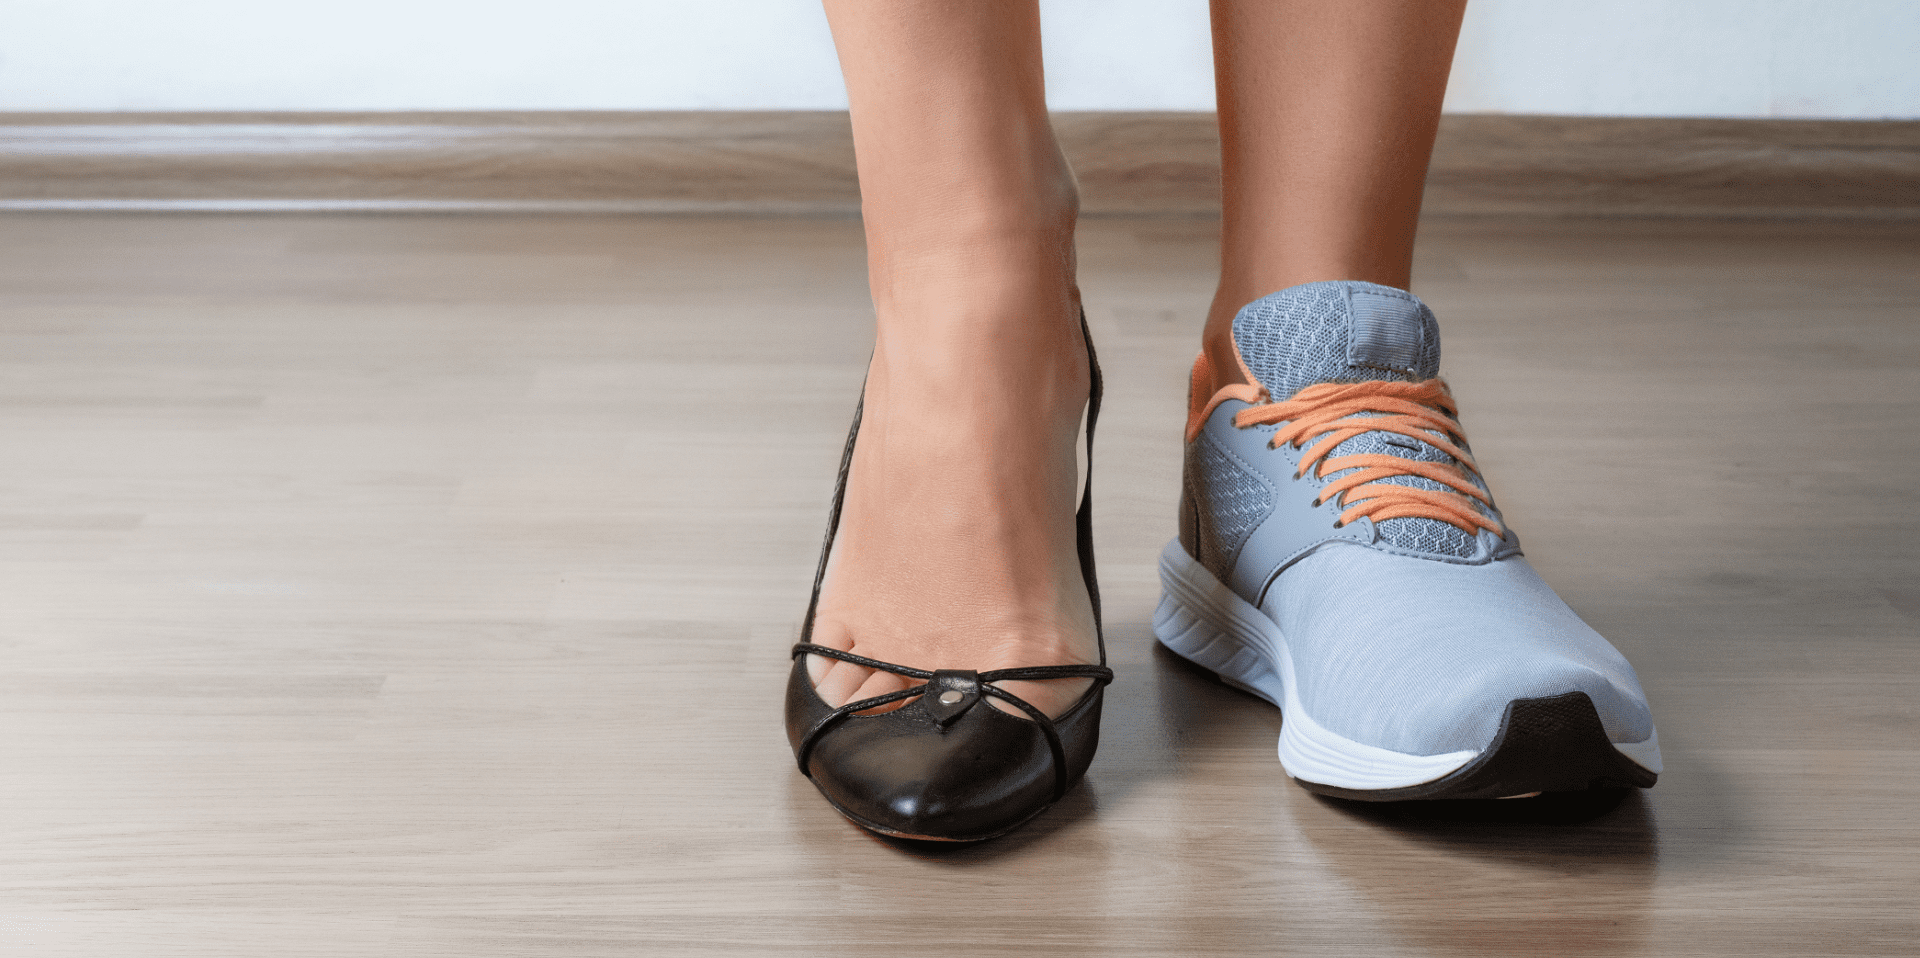 Two feet - one in a high heel, one in a trainer, emphasizing the importance of choosing the correct footwear for Morton's Neuroma. 